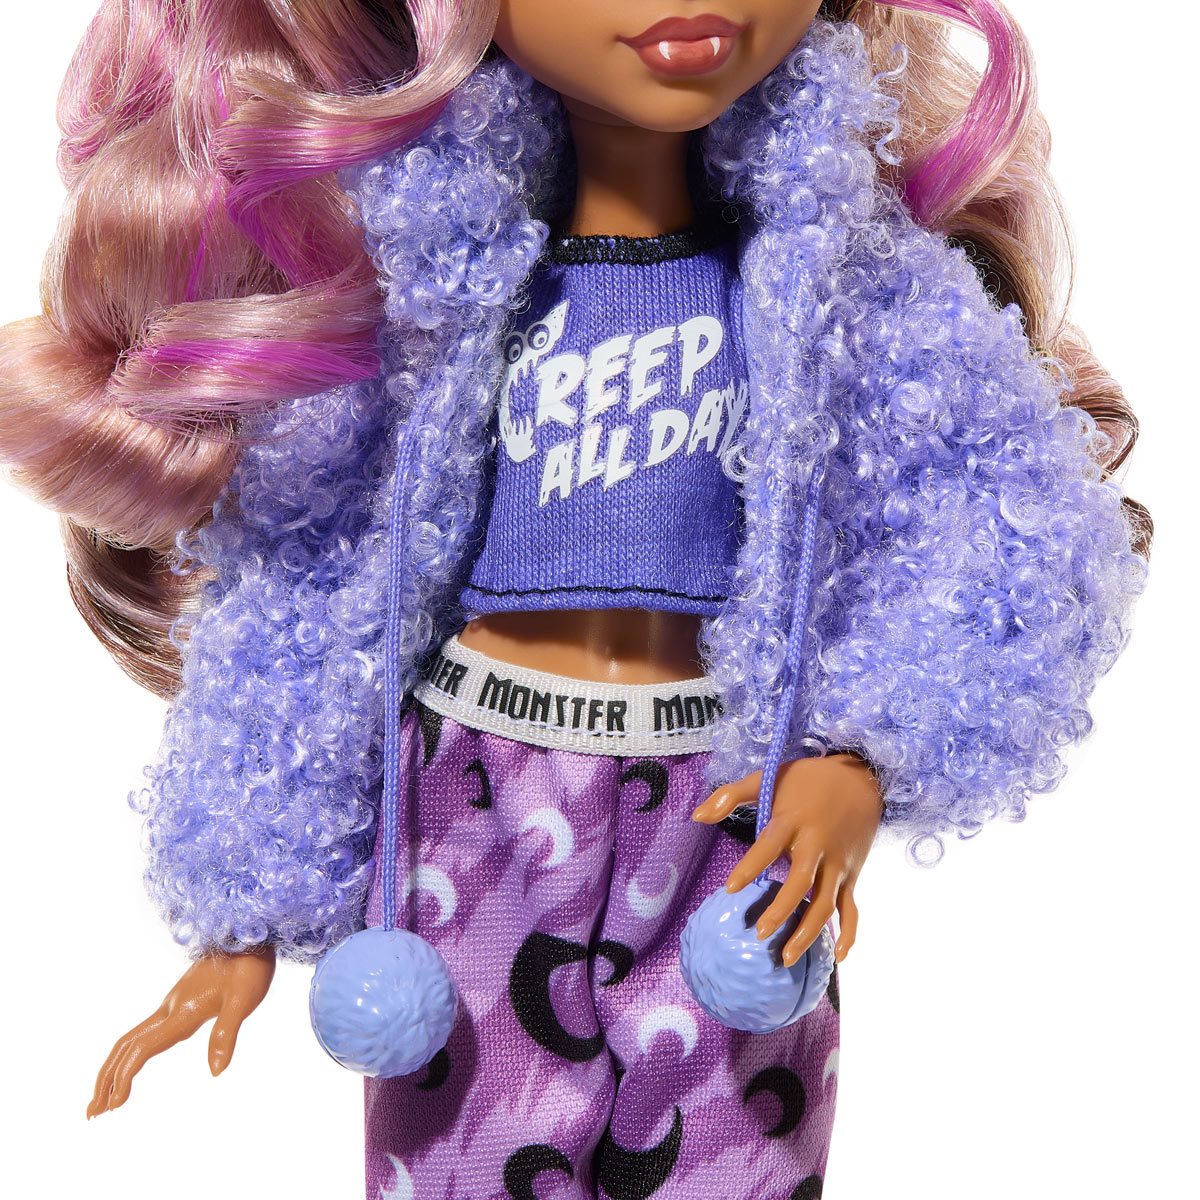 Creepover Party Clawdeen Doll